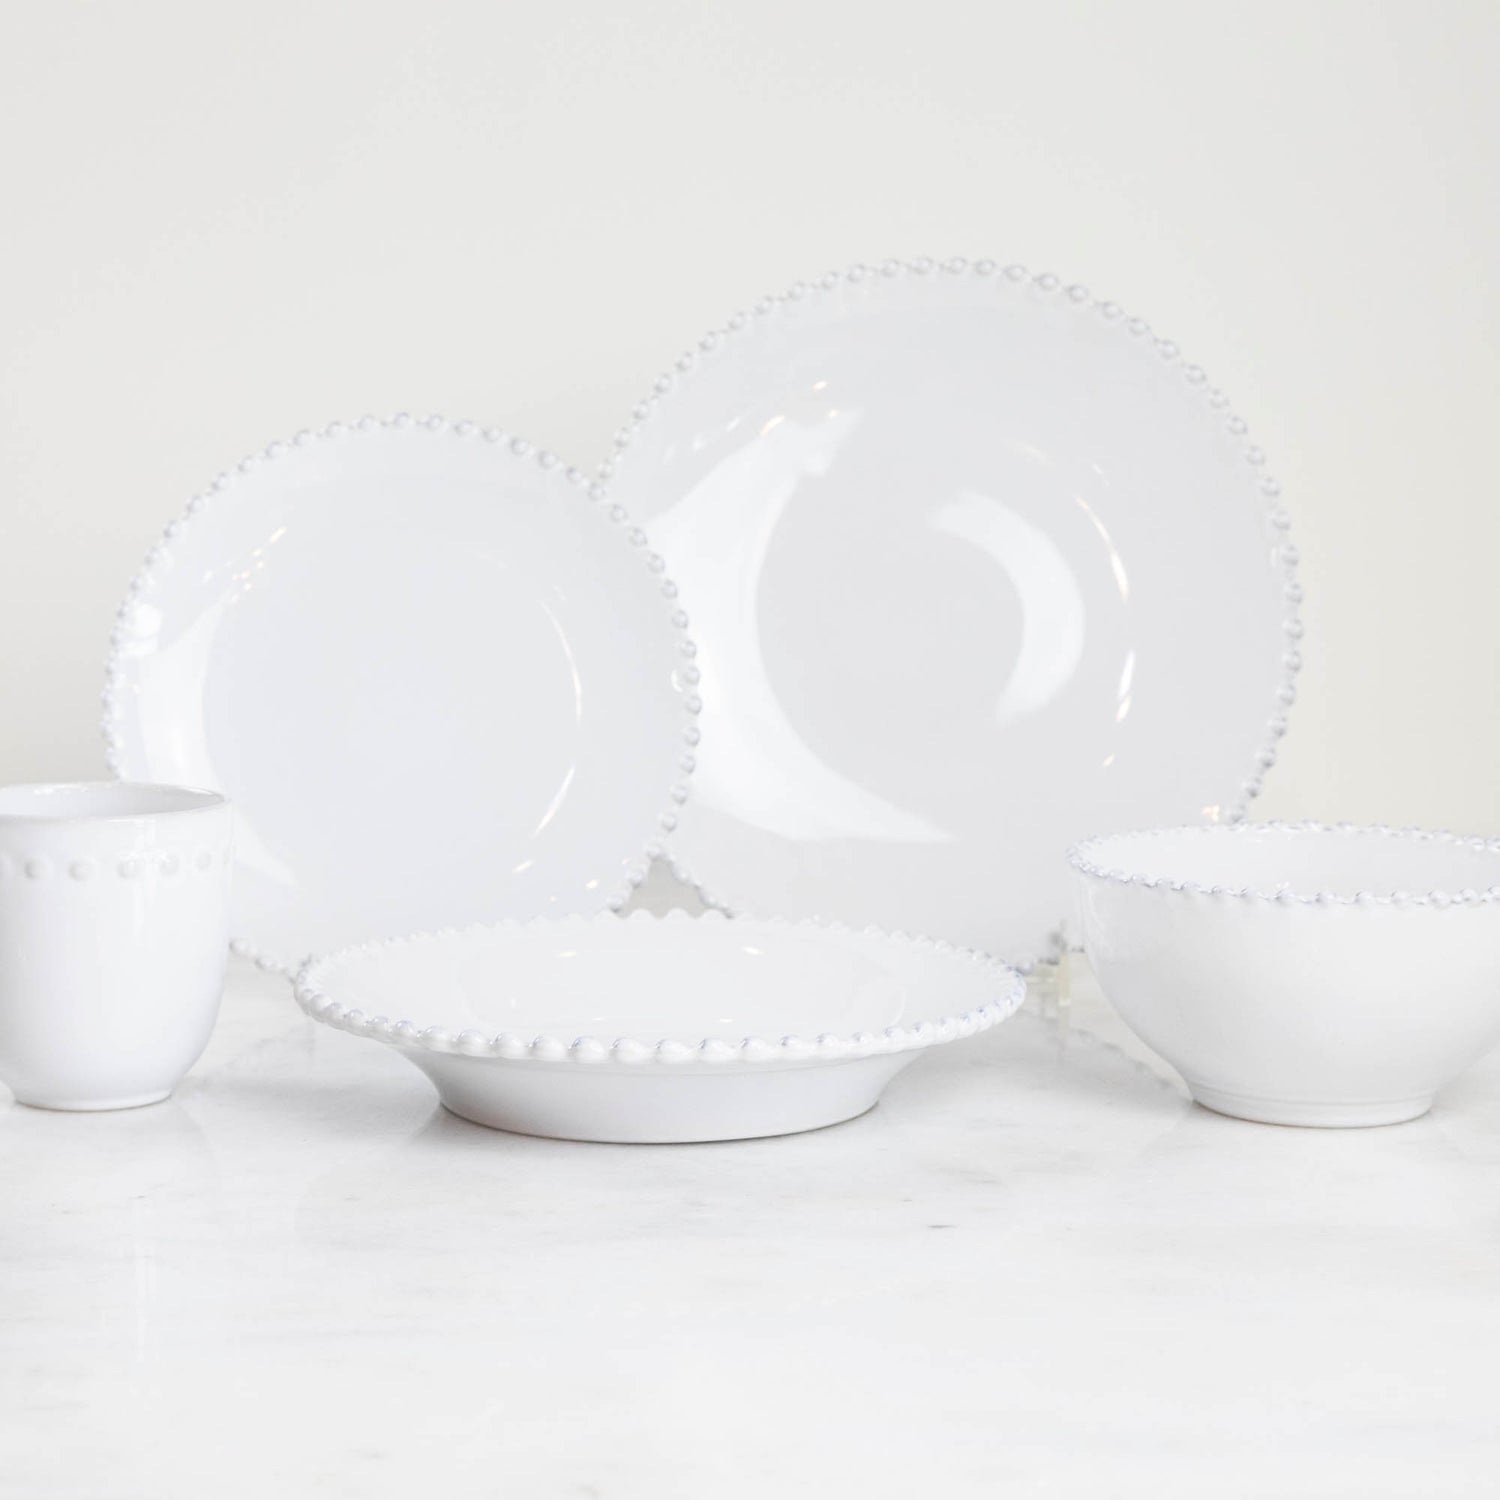 A set of Costa Nova Pearl White Dinnerware with beaded edge design displayed against a light background.